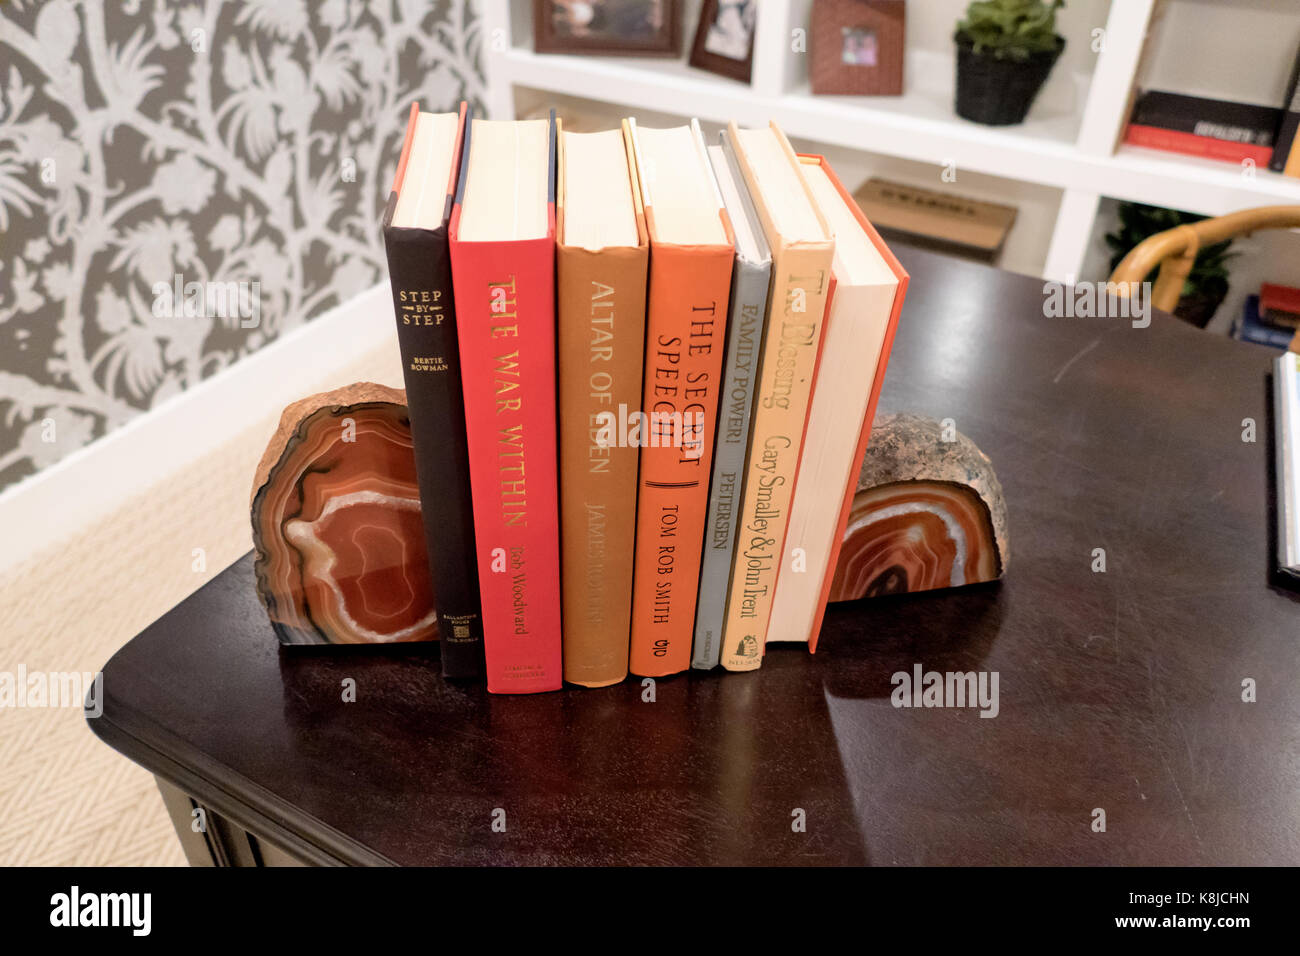 A Row Of Books Held By Wonderstone Book Stoppers On A Desk Stock